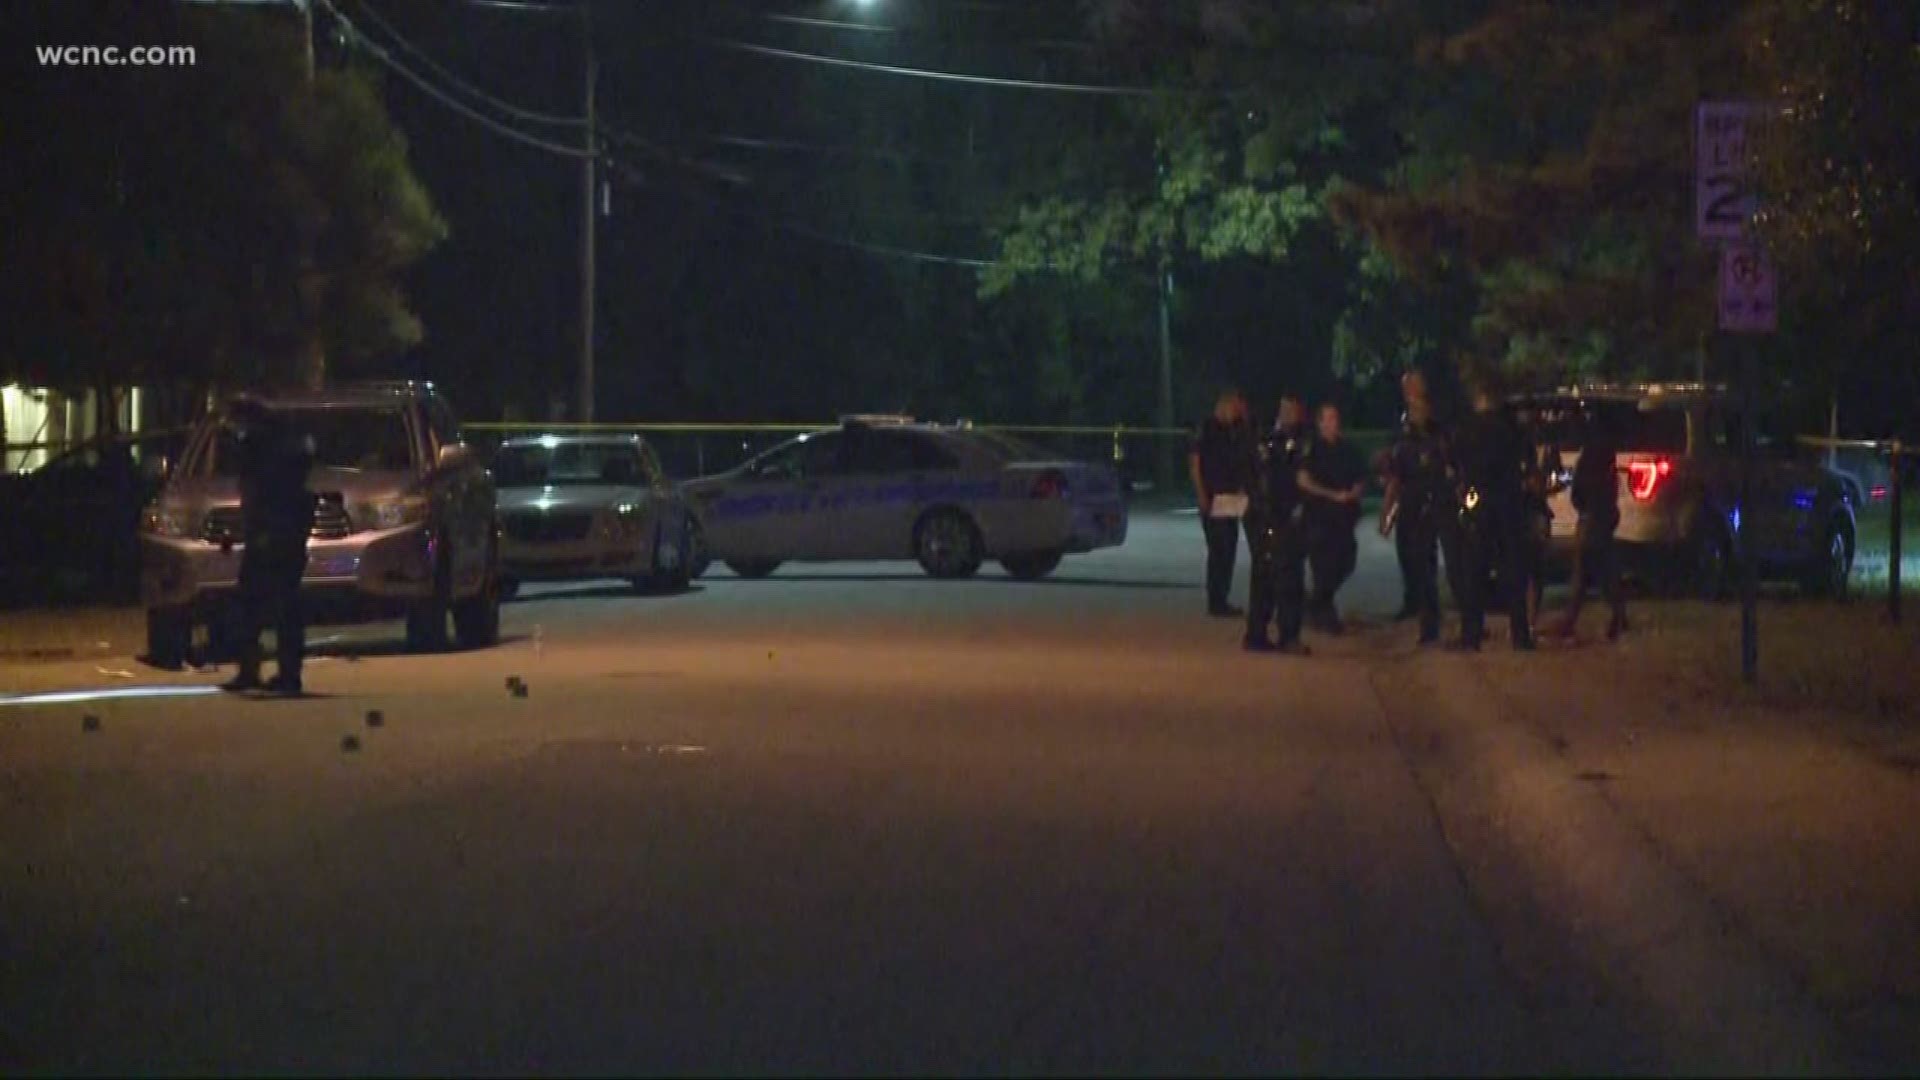 Search for suspect who shot three teens in Charlotte